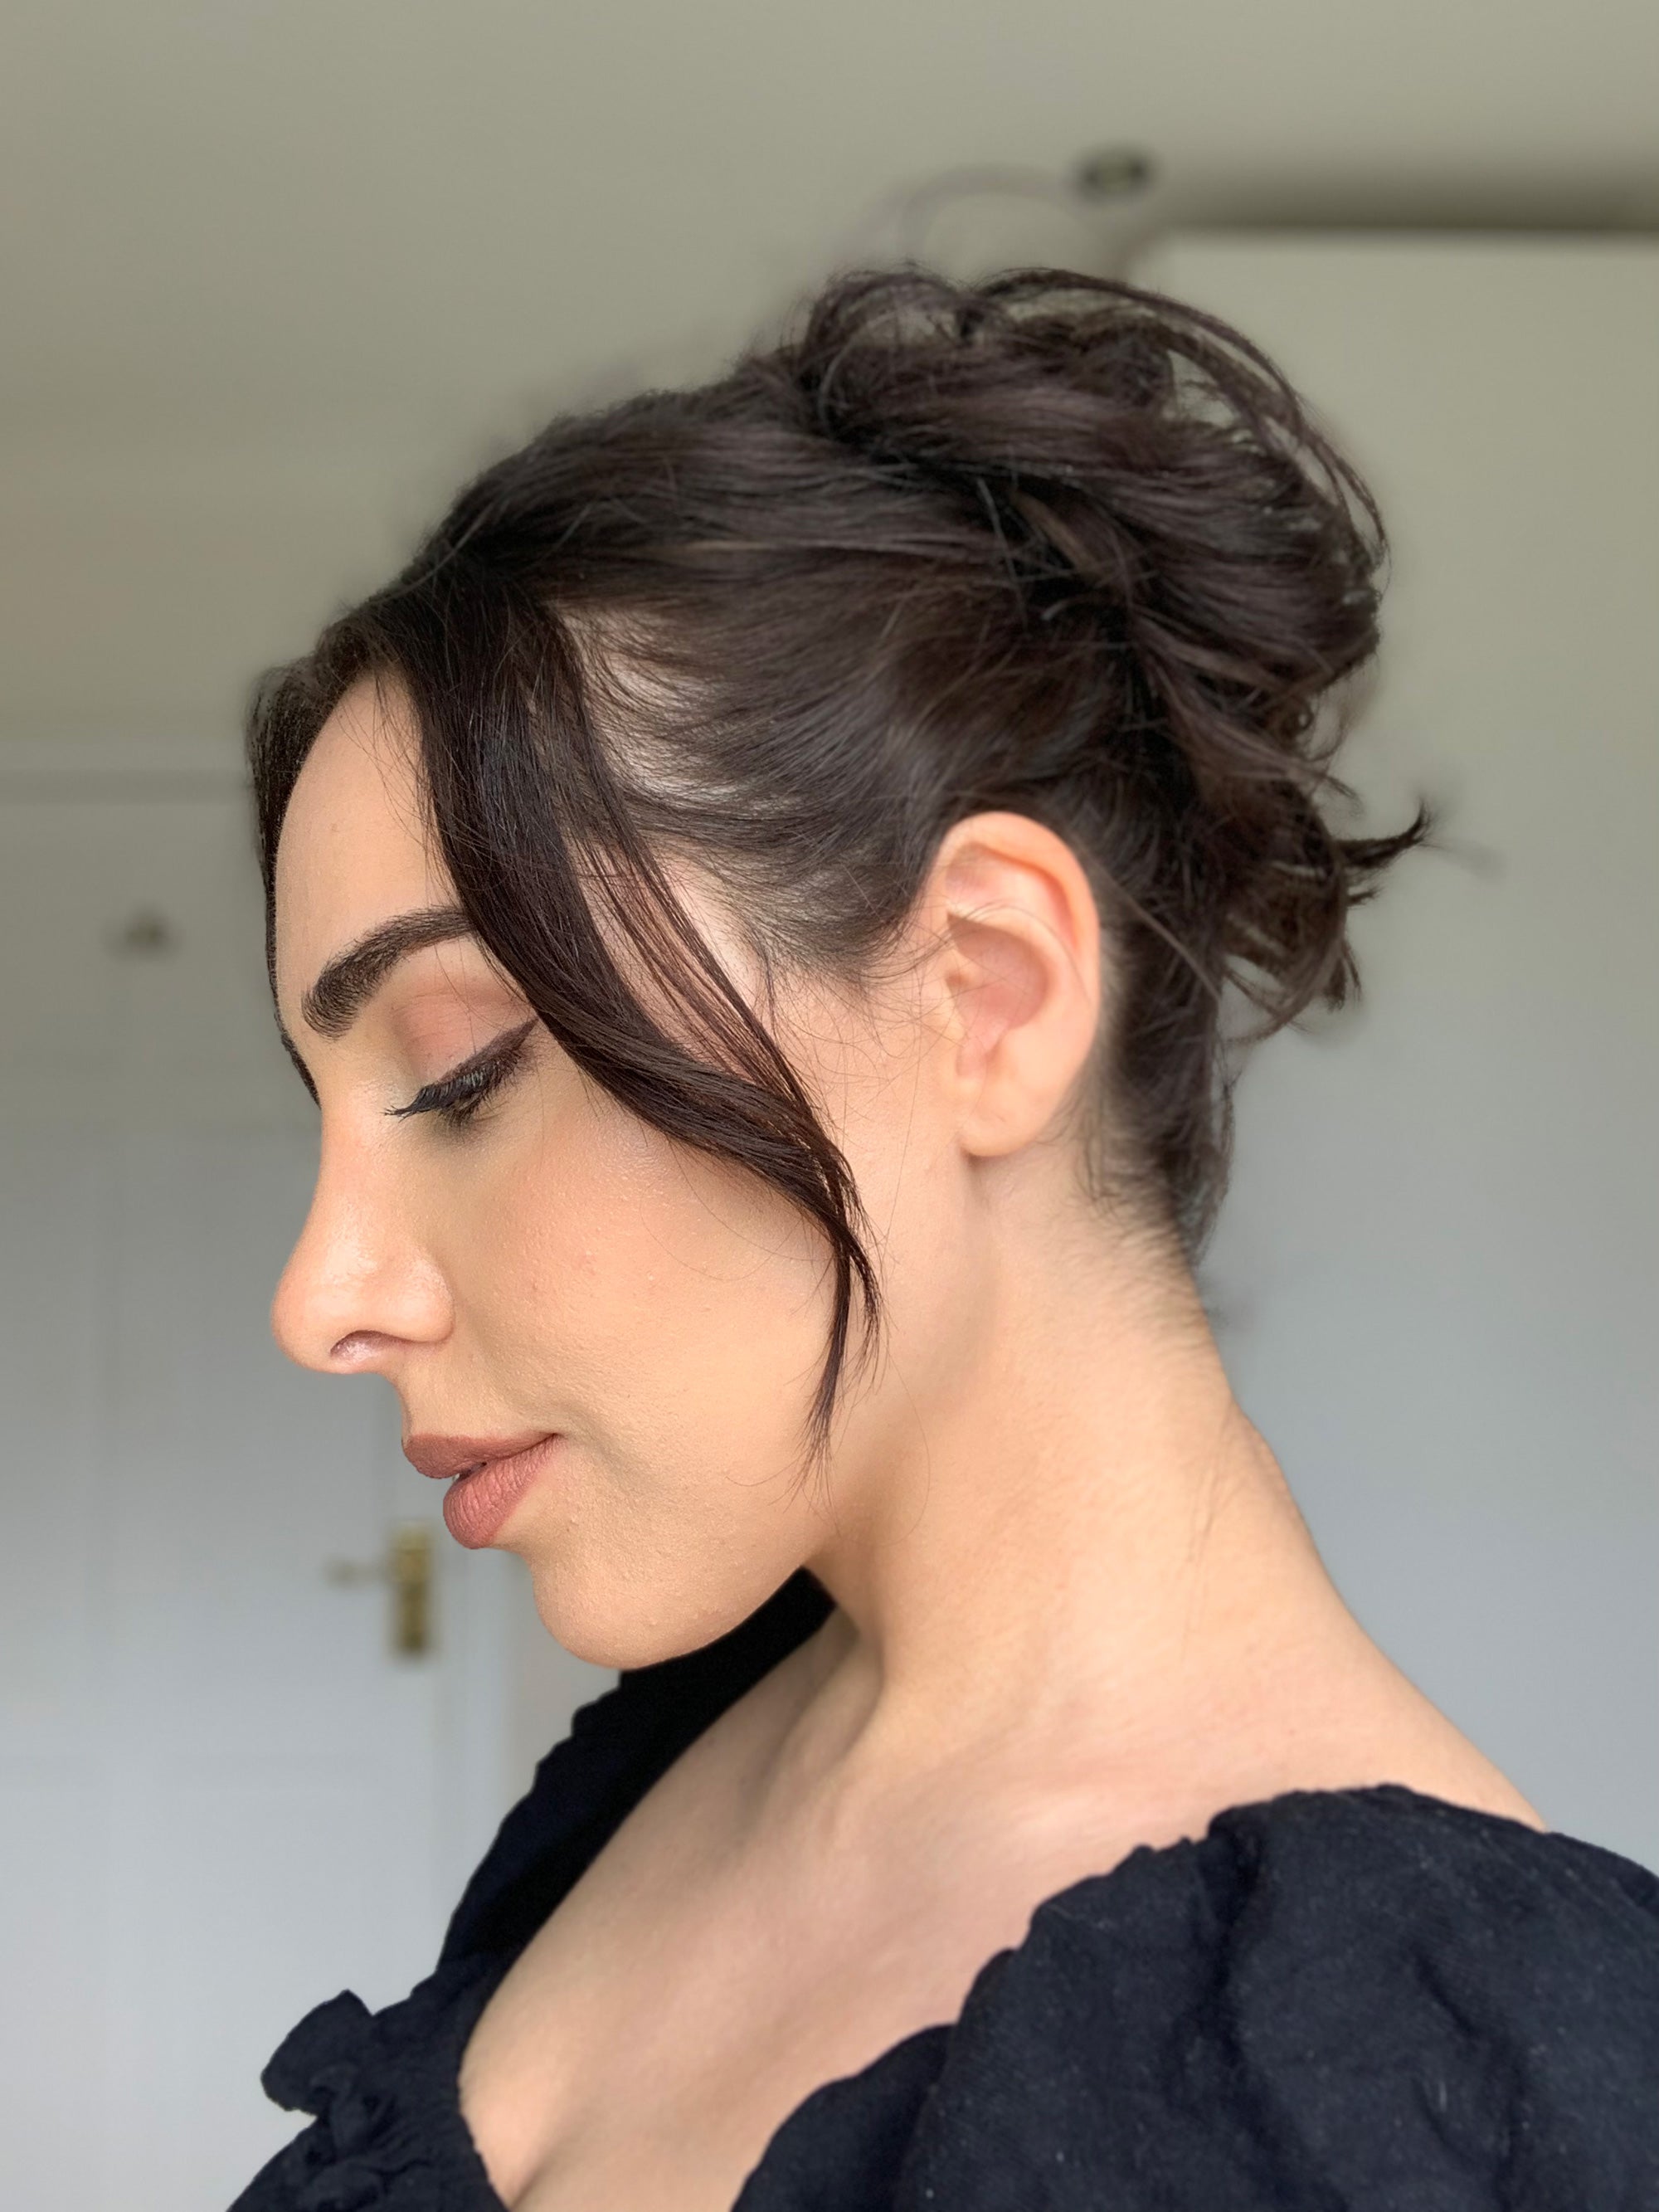 Have You Tried This Viral Bun Tutorial? 😍 - YouTube